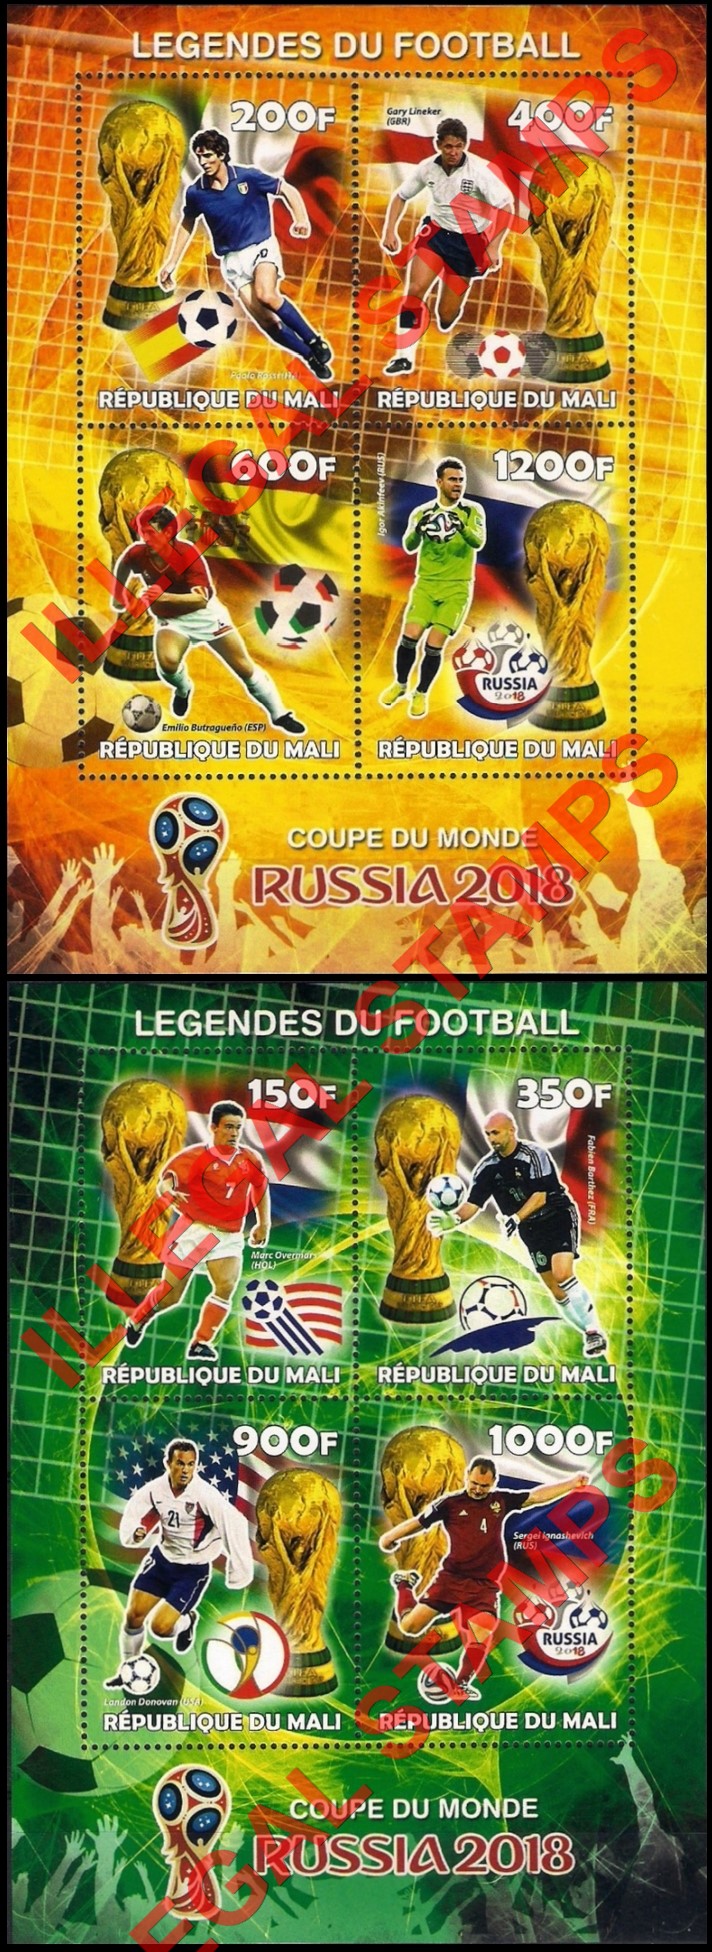 Mali 2016 Soccer World Cup Russia 2018 Legends of Football Illegal Stamp Souvenir Sheets of 4 (Part 2)